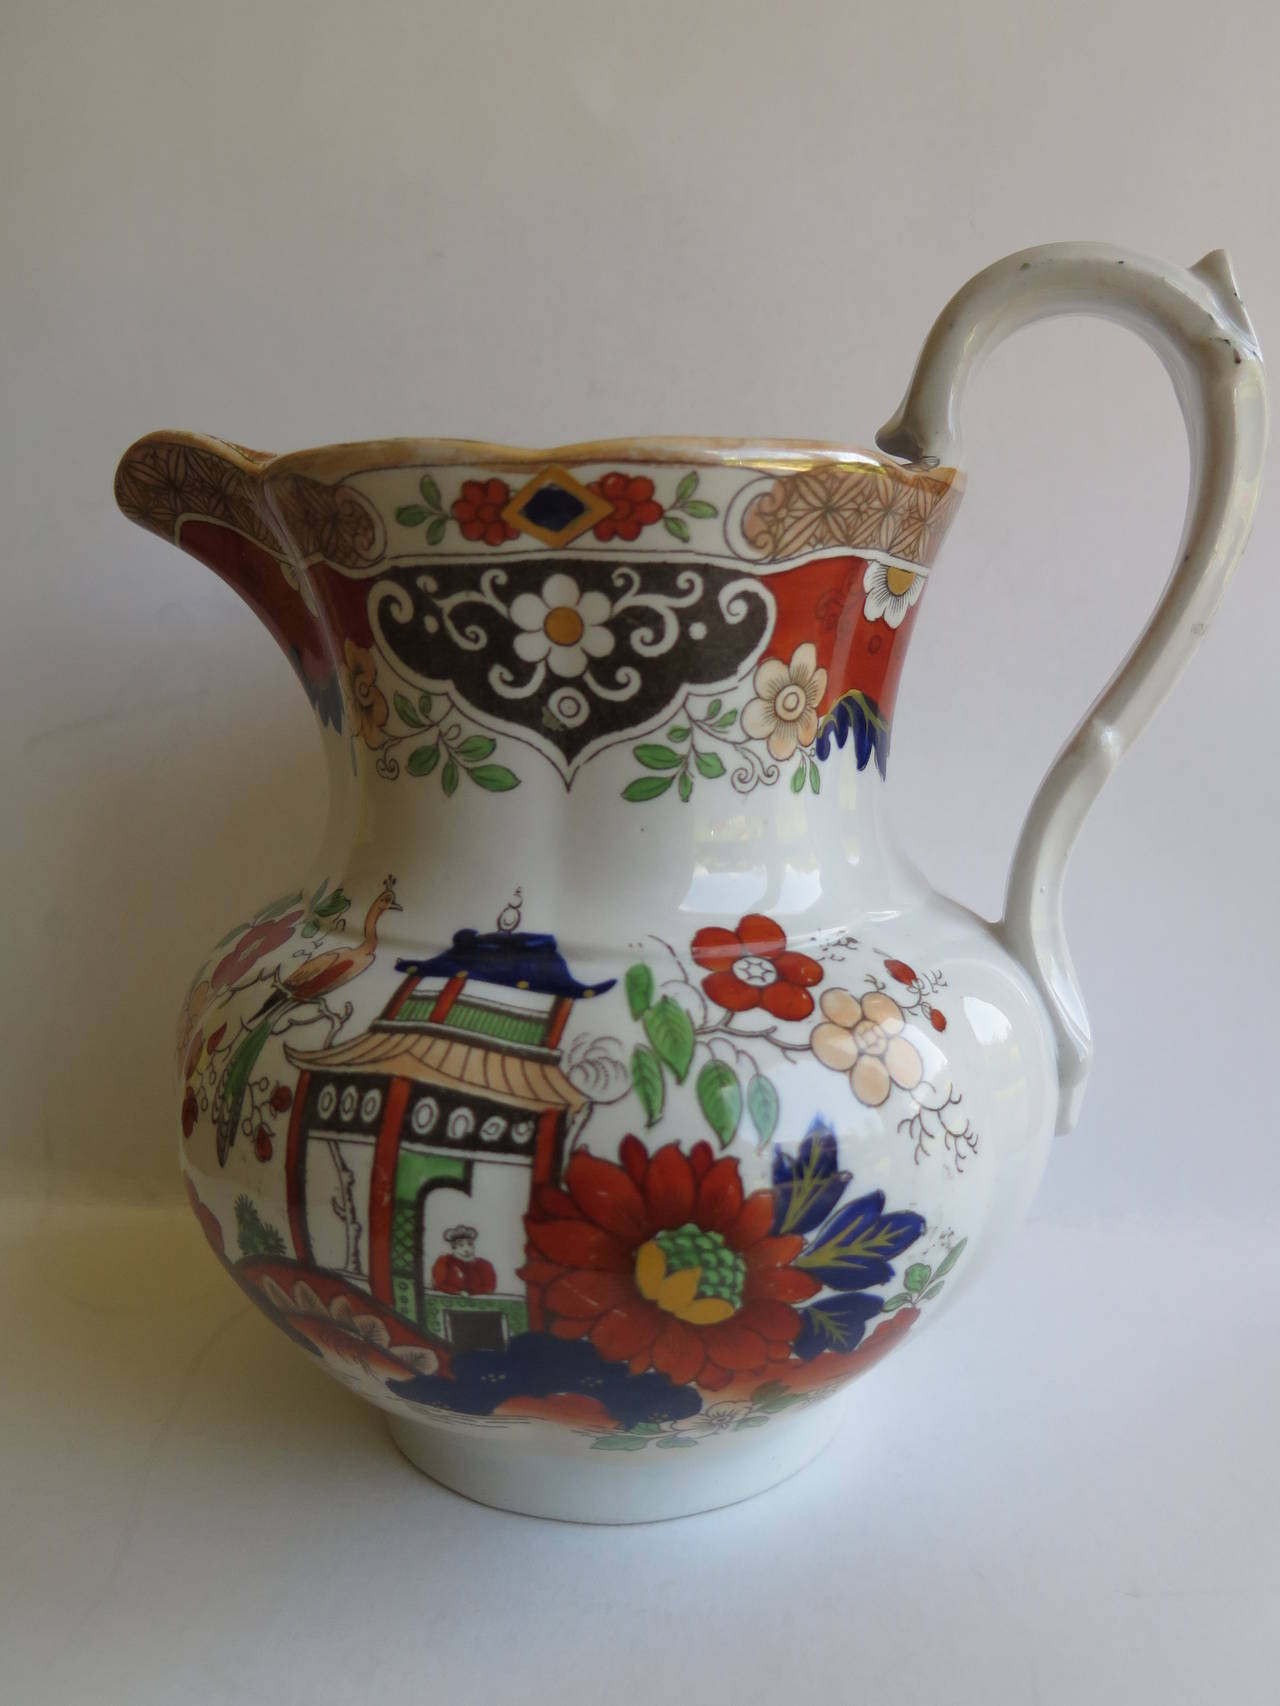 This is a good Ironstone pottery Jug or Pitcher with a high loop handle having an upper thumb rest. The jug has a moulded, vertically fluted shape with an integrated filter, formed into the inner top before the spout. 

The Jug has a typical